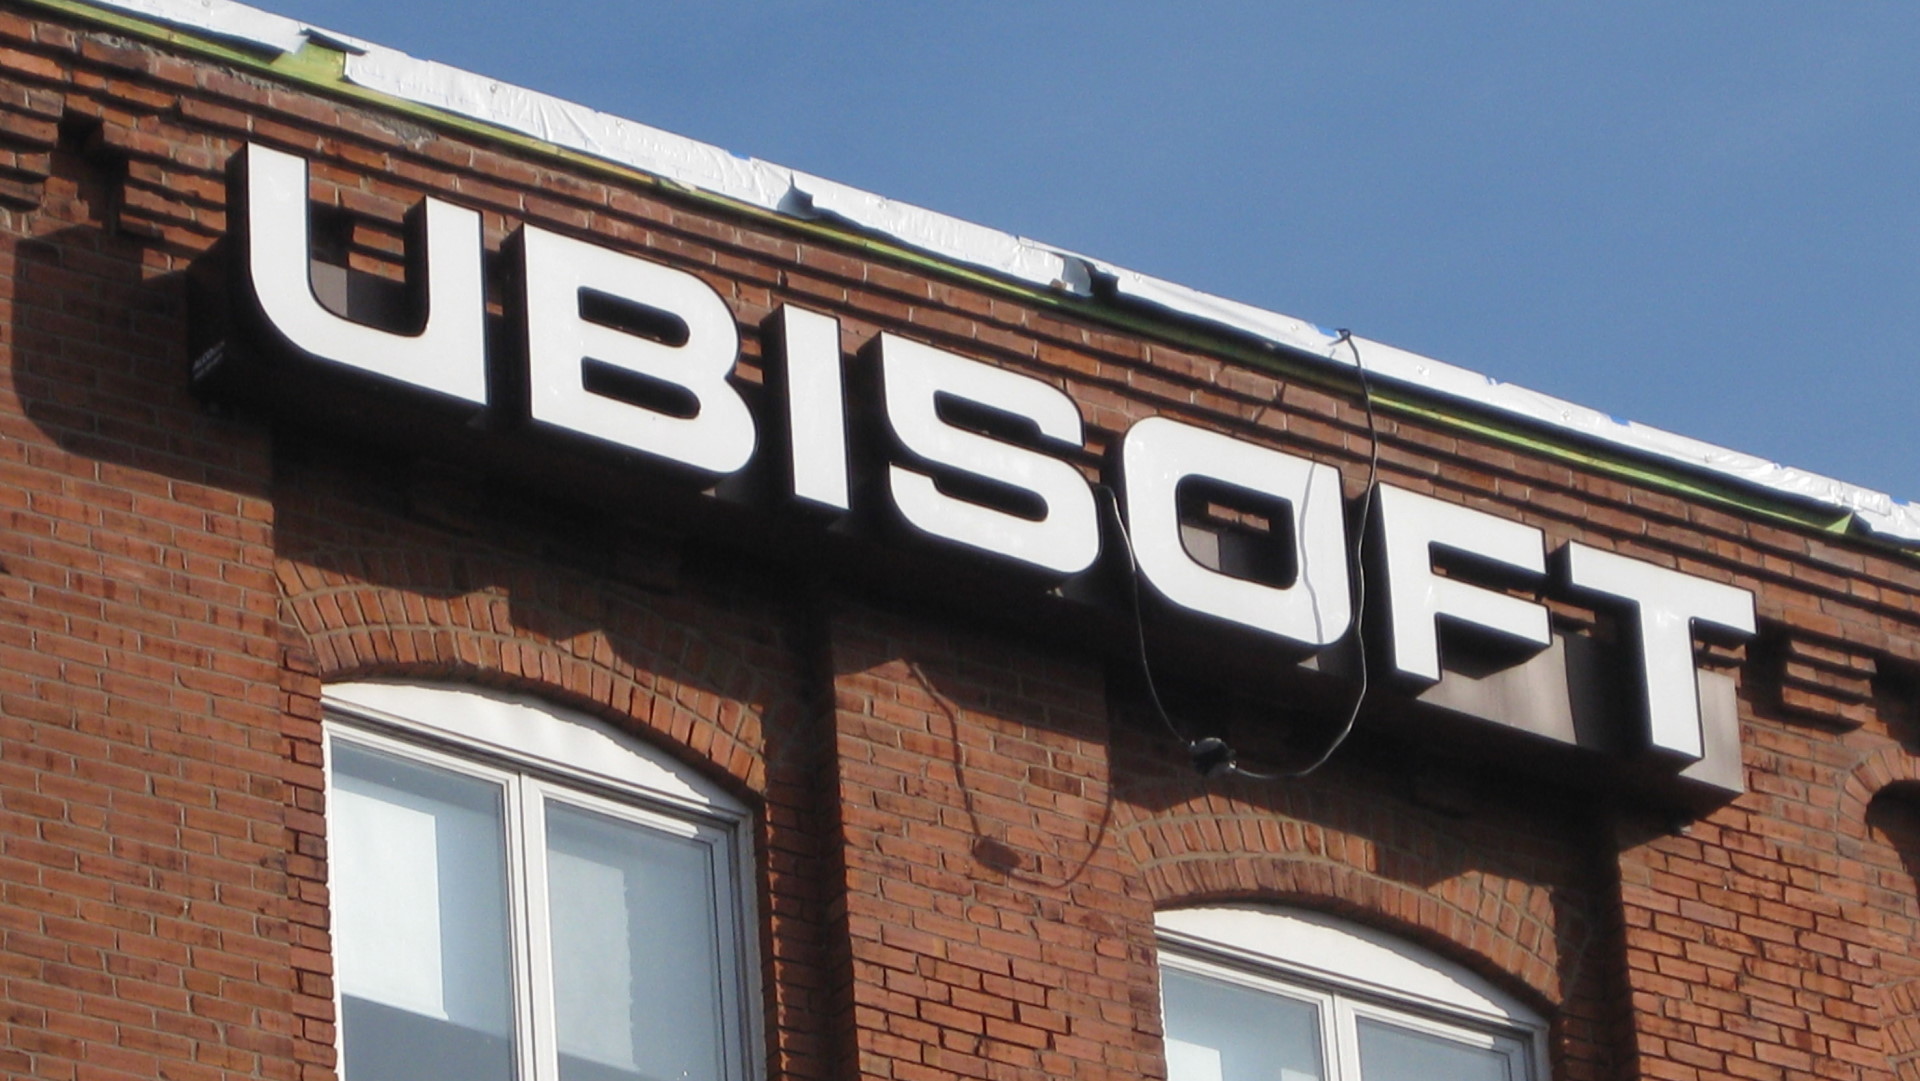  The layoffs continue: Ubisoft cuts 124 jobs worldwide, including nearly 100 in Canada 